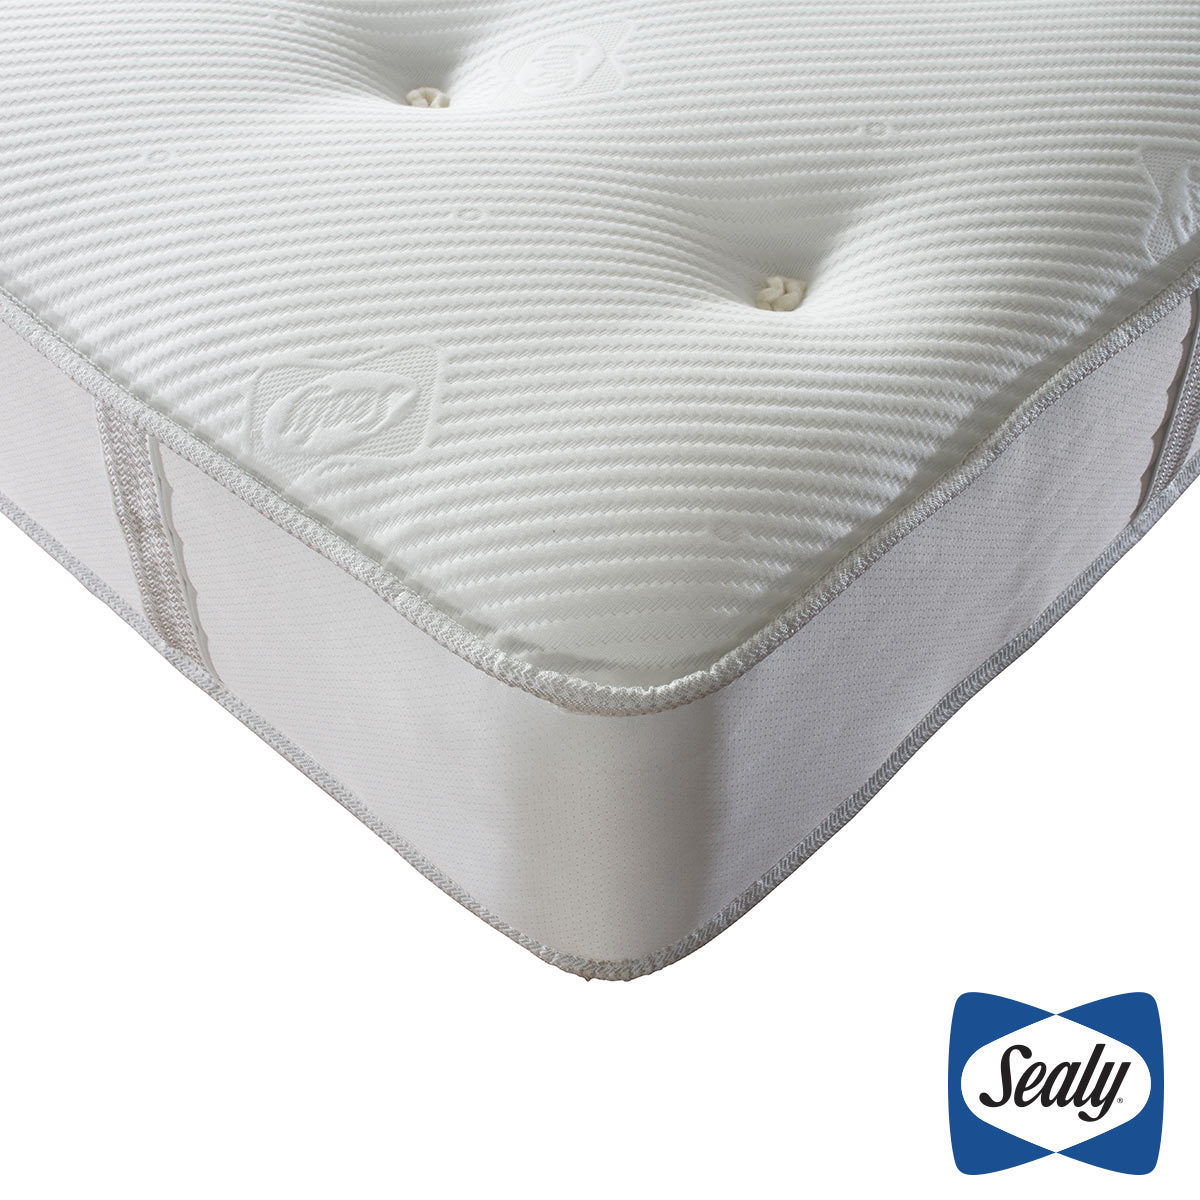 Sealy 1000 Deluxe Pocket Memory Tufted Mattress, Single